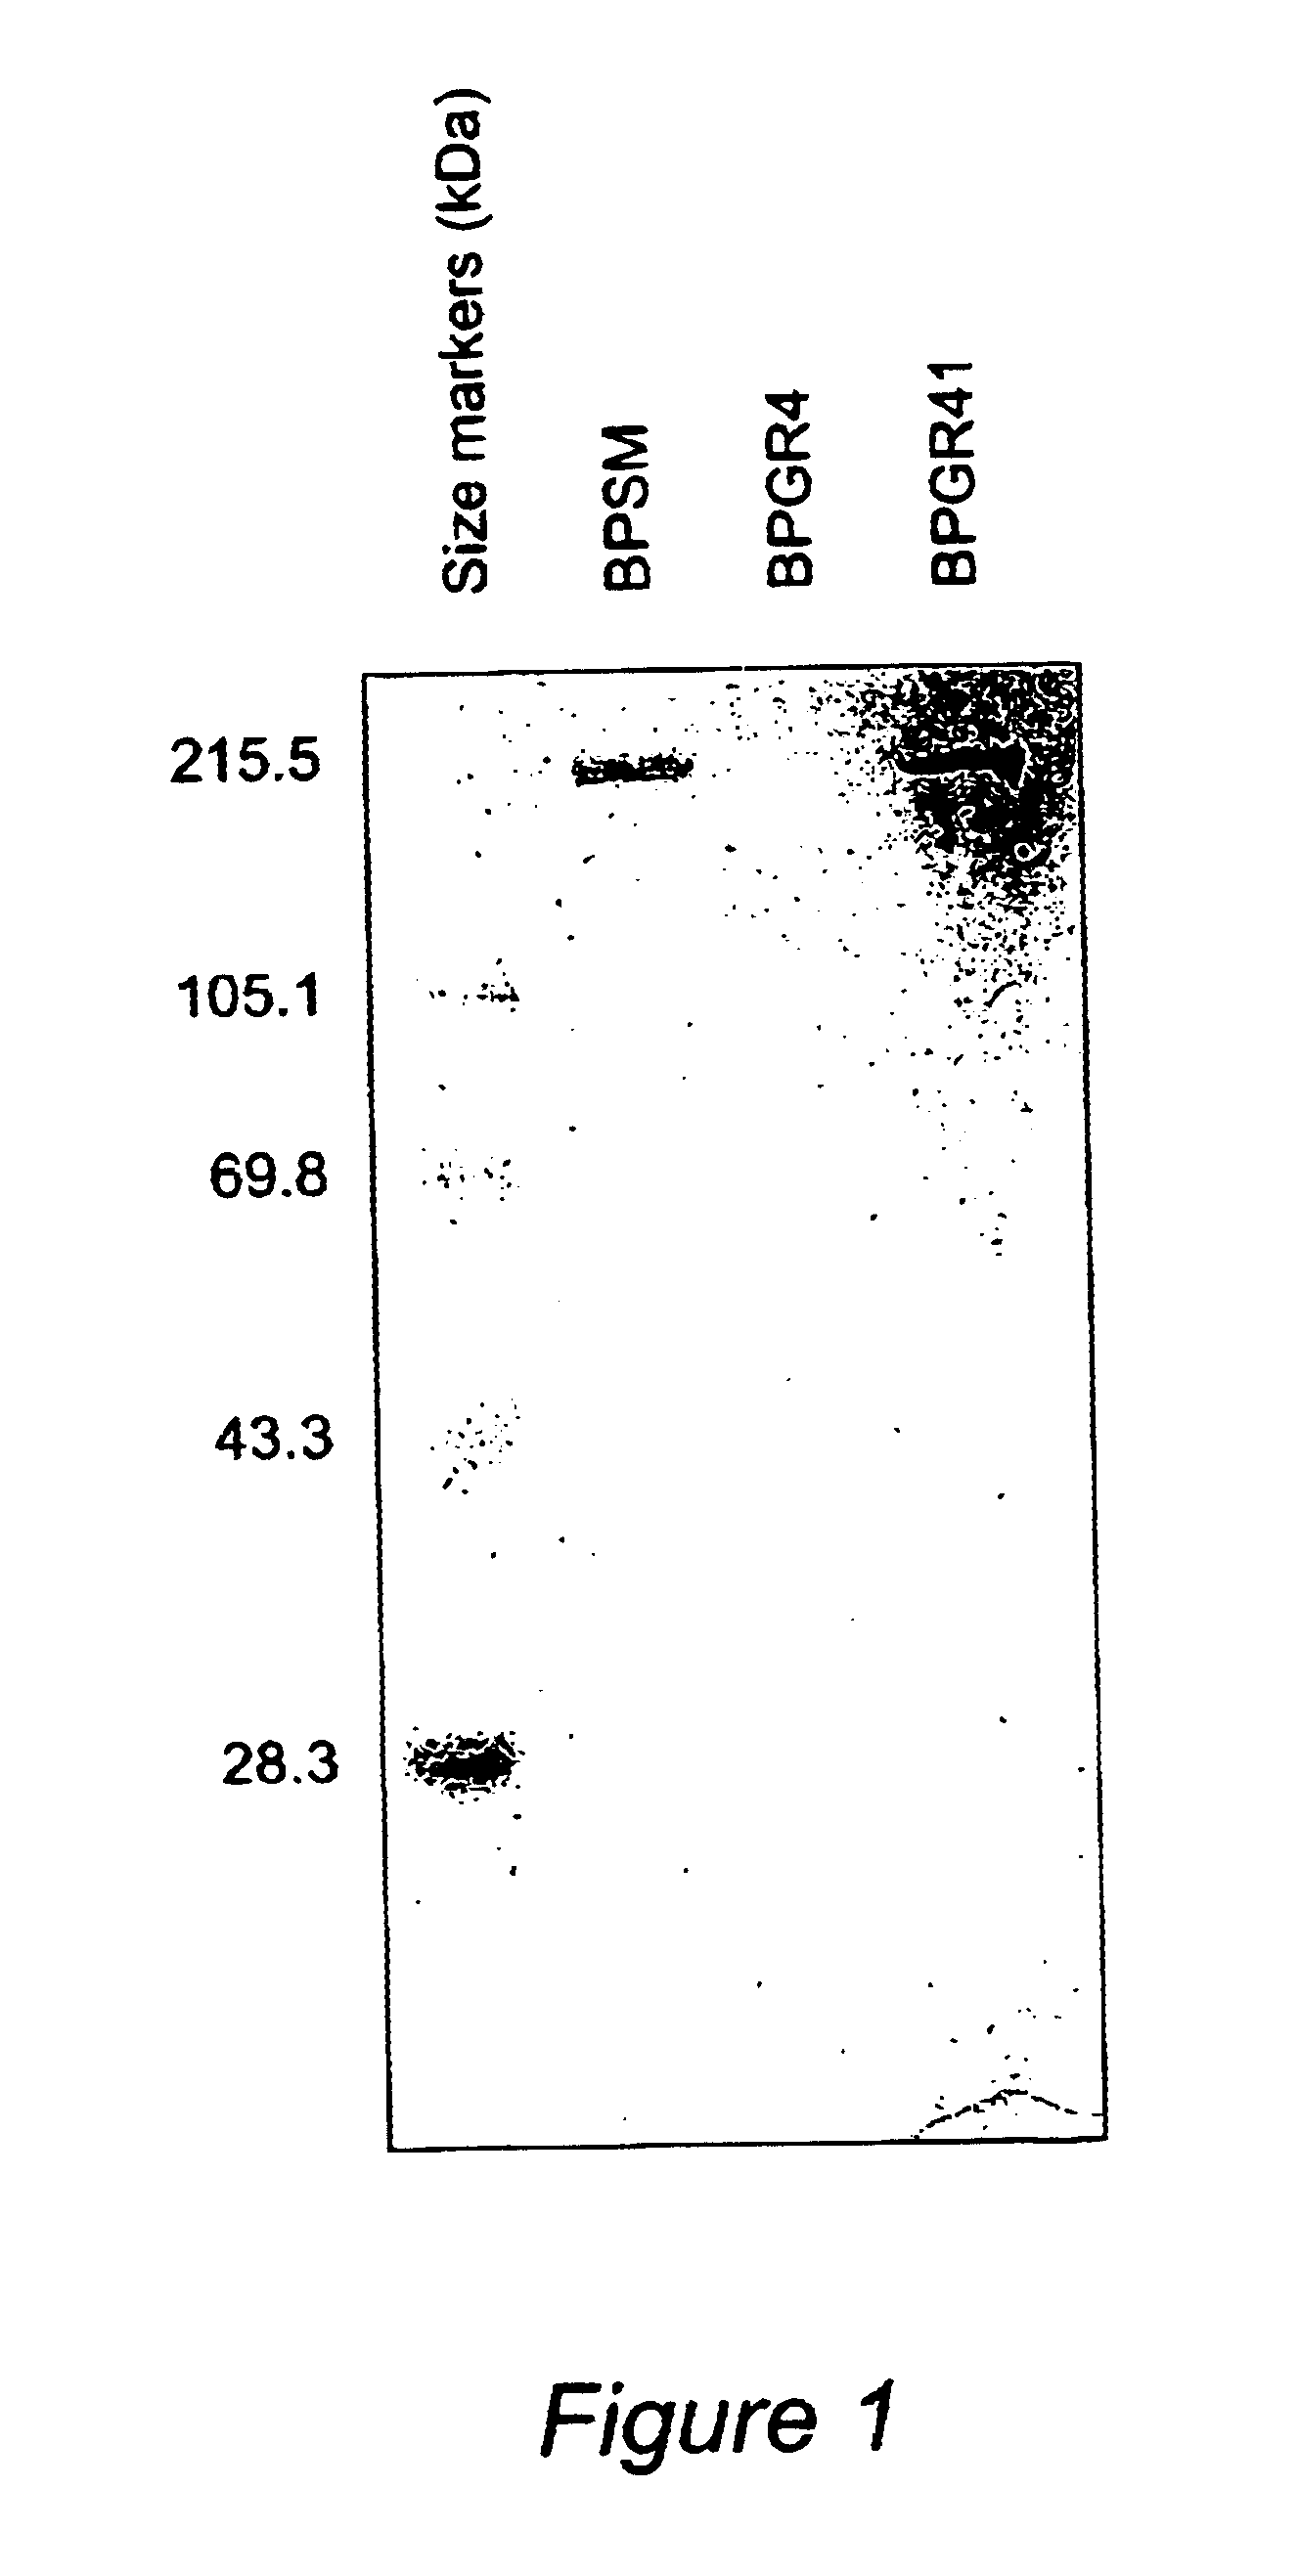 Recombinant proteins of filamentous haemagglutinin of bordetella, particularly bordetella pertussis, method for producing same, and uses thereof for producing foreign proteins of vaccinating active principles